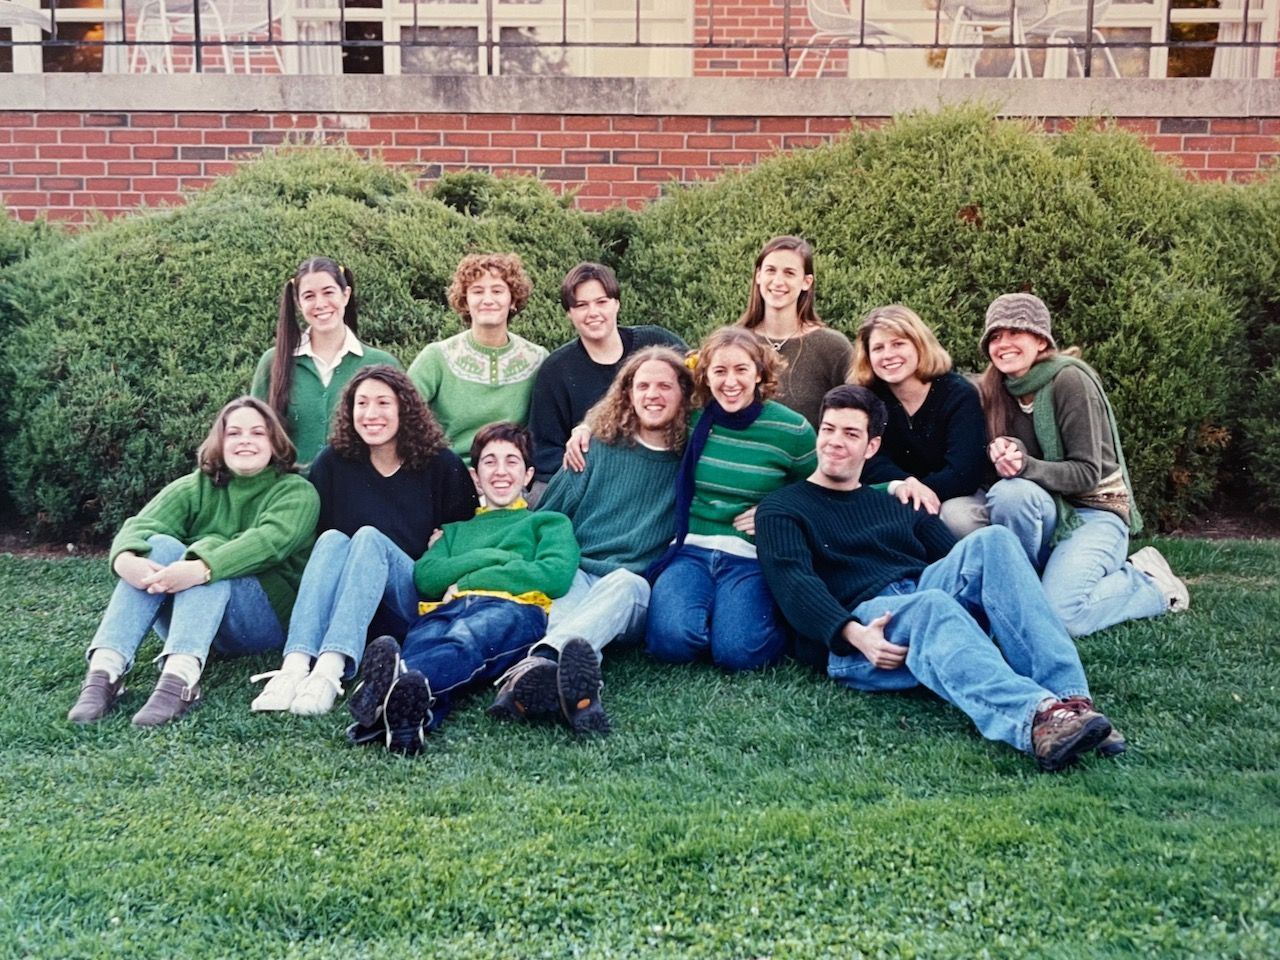 Group of 12 smiling college students in green sweaters, on a green lawn with green shrubs behind them.